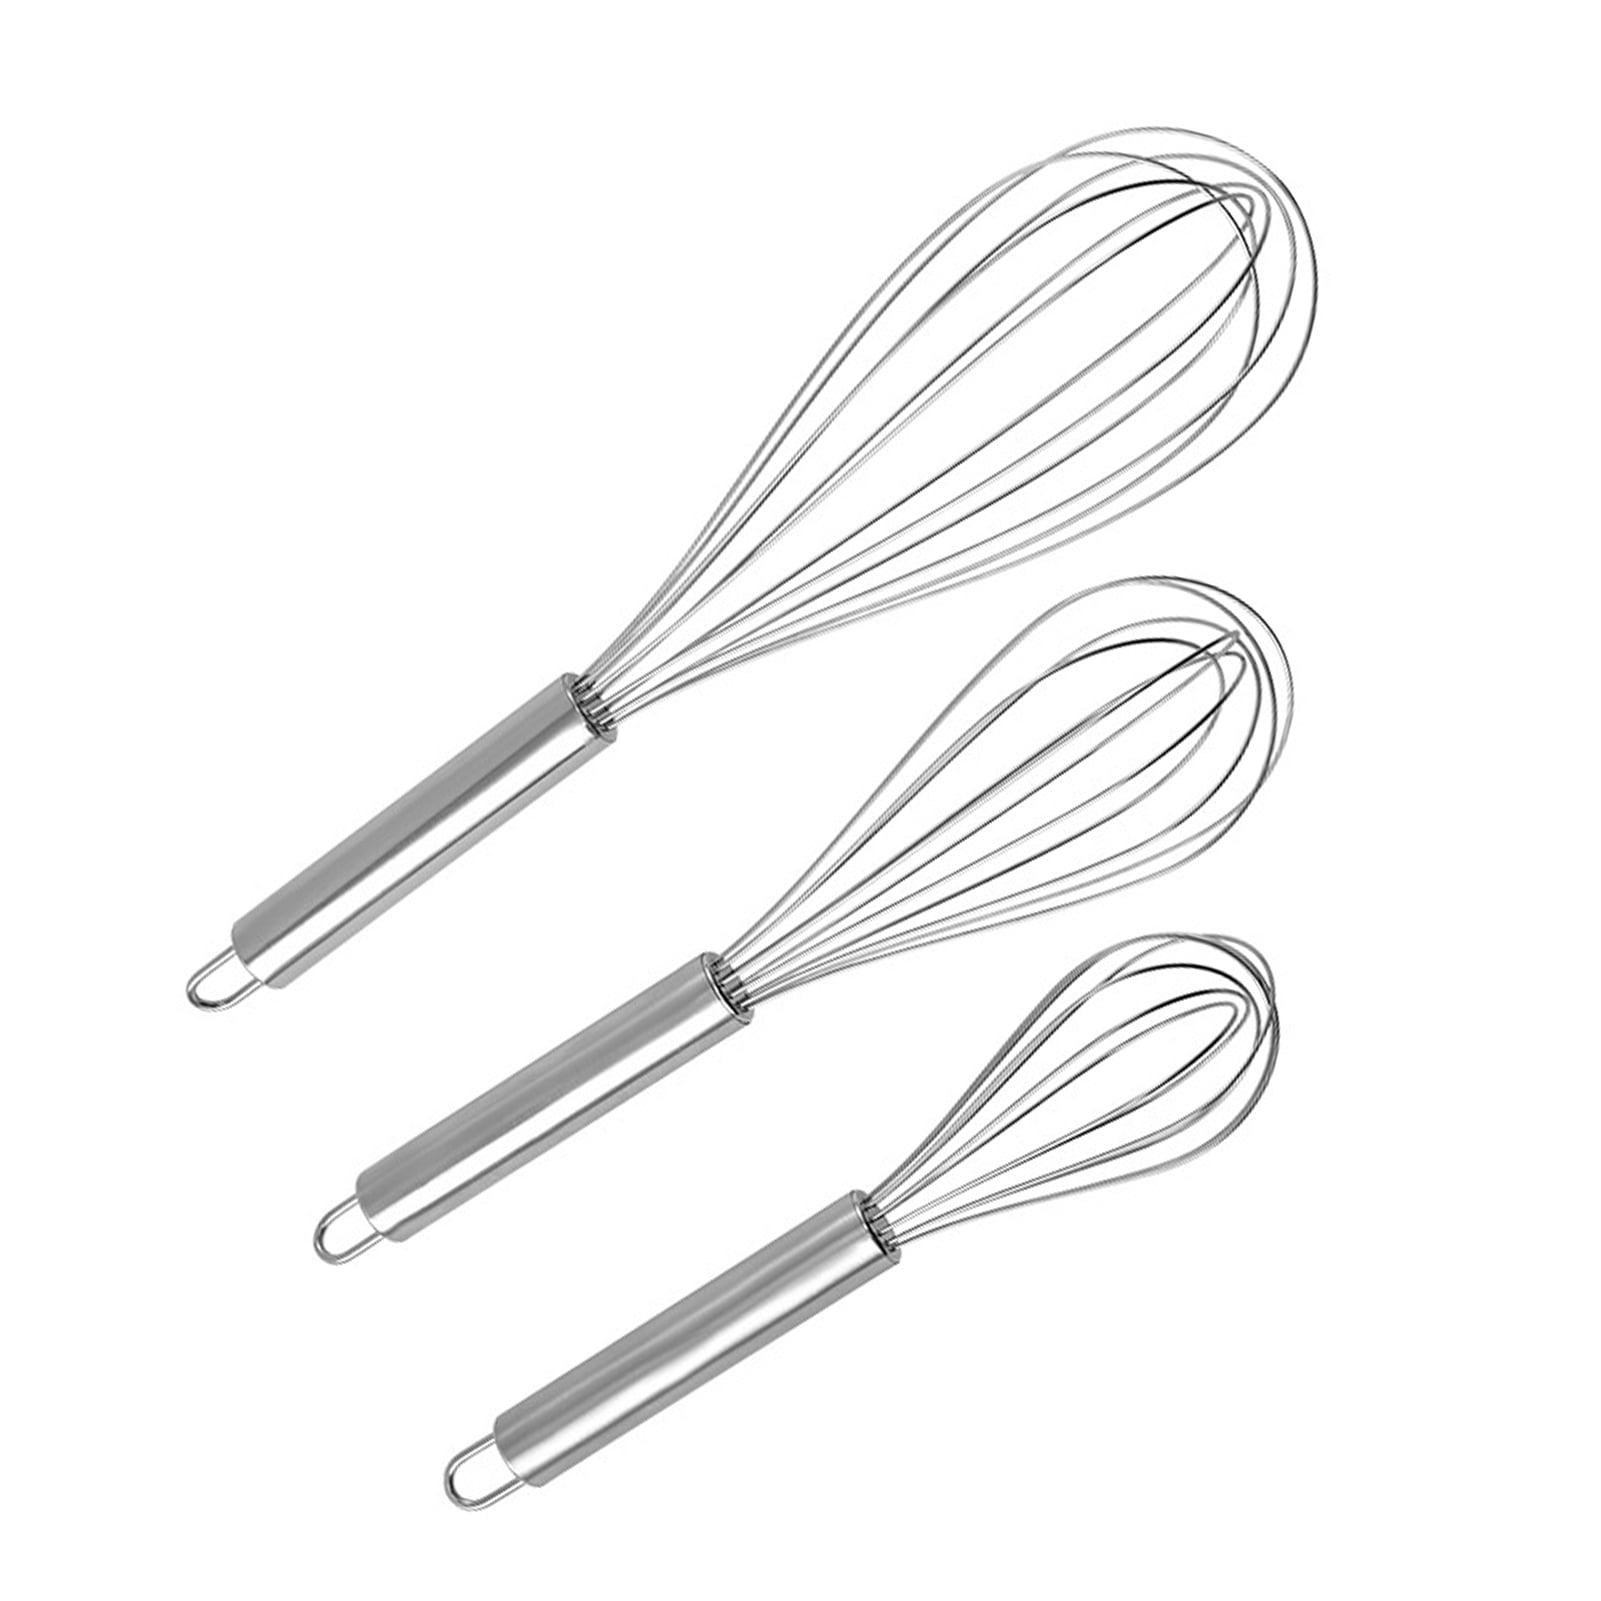  Stainless Steel Whisks – 2 Pack Wire Whisk Set 10” and 13”  Balloon Kitchen Whisks for Whipping, Mixing, and Blending – Metal Whisk,  Hand Whisk, Baking Whisk: Home & Kitchen